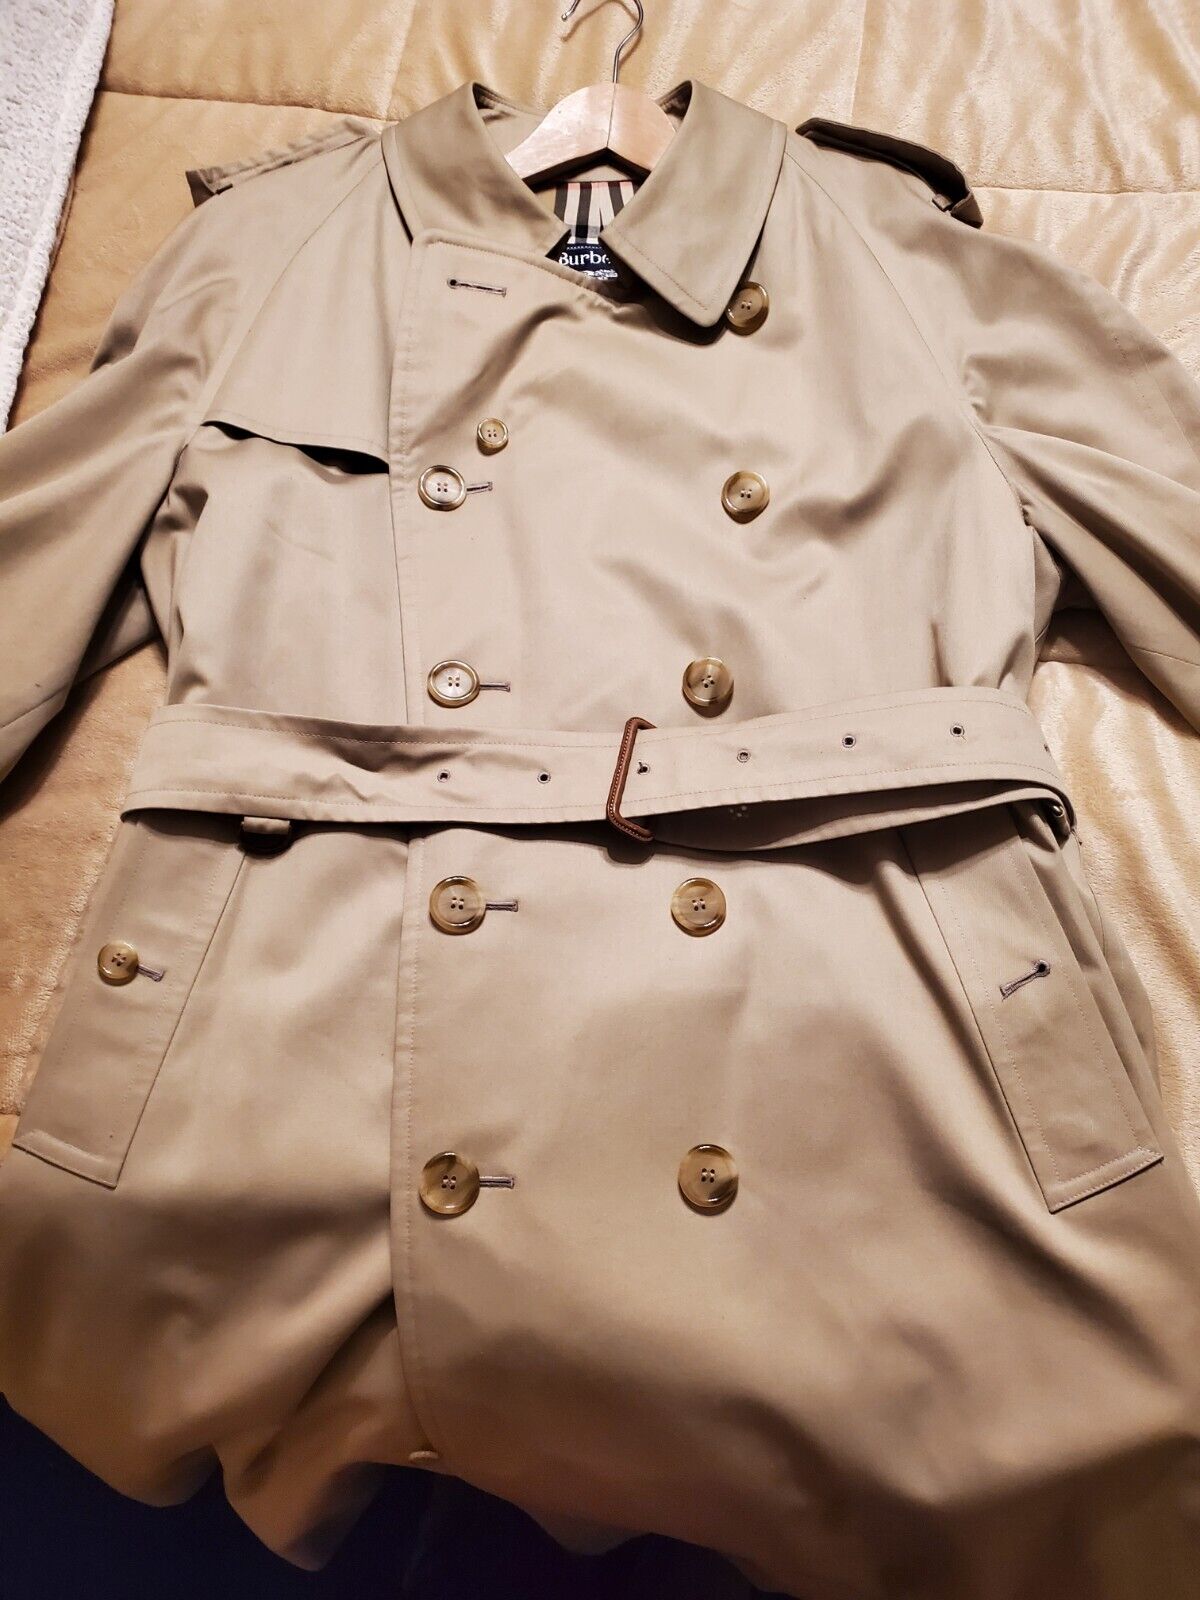 Authentic Burberry Tan Long Trench coat Size 44 R - image 7